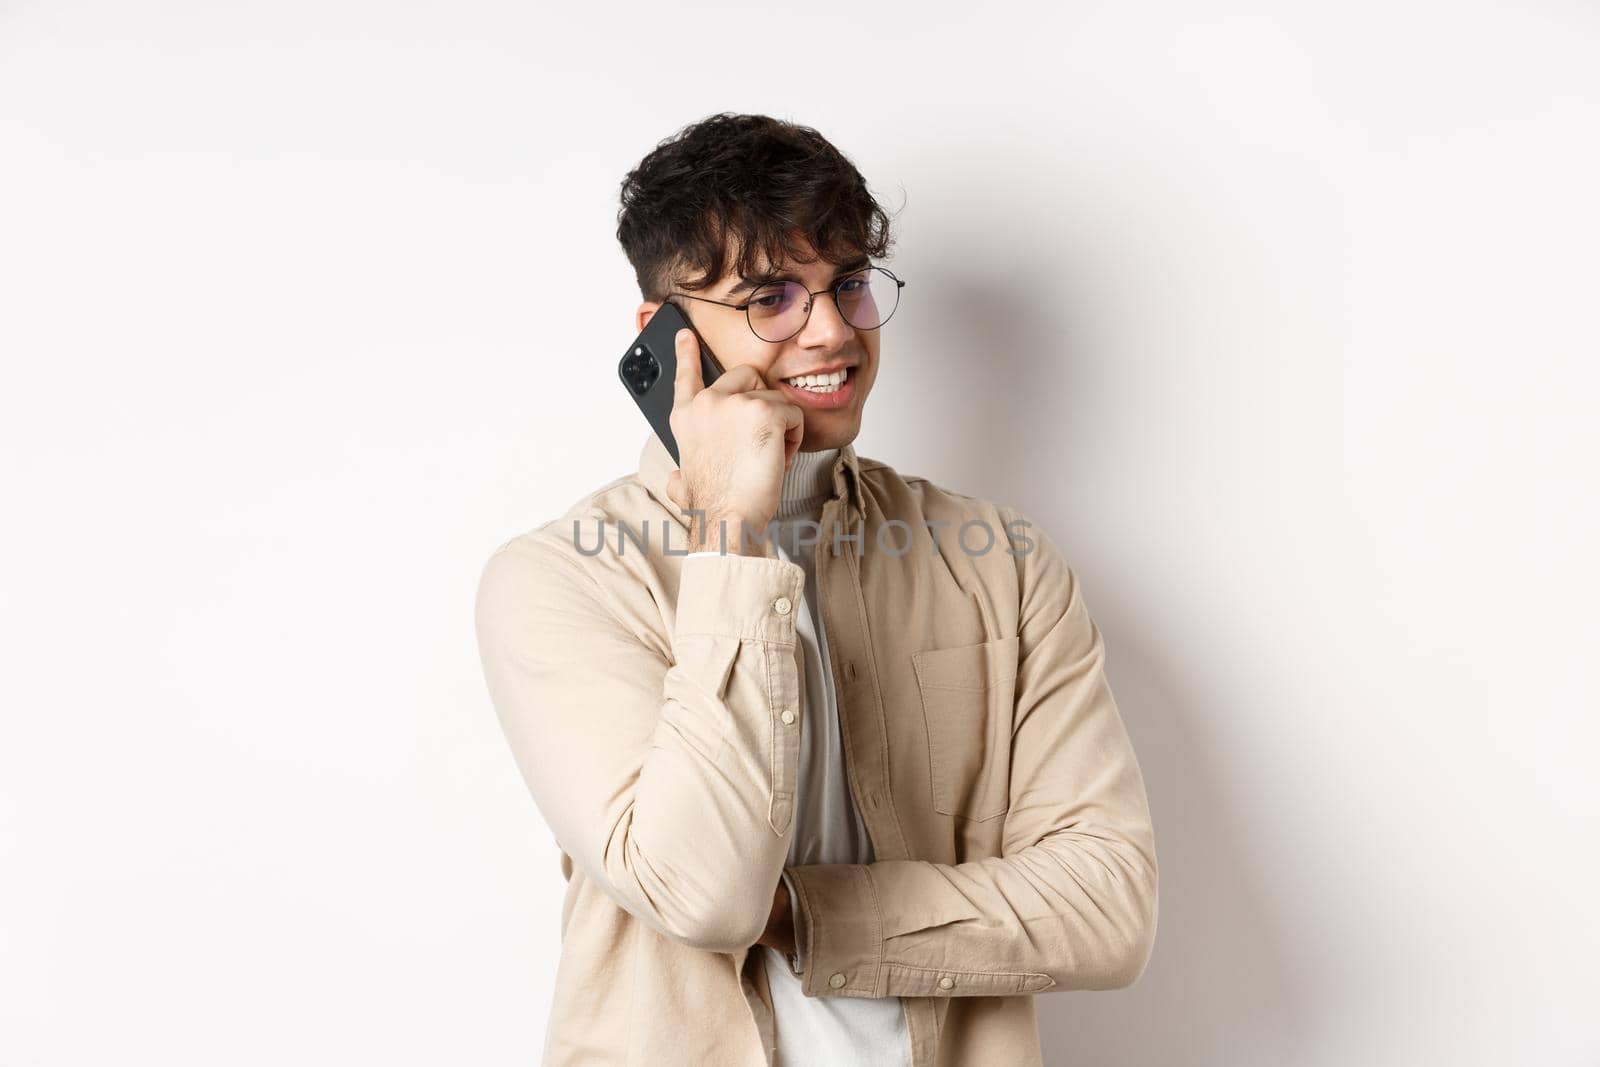 Real people concept. Handsome modern man talking on mobile phone, look aside and holding smartphone near ear, standing on white background.